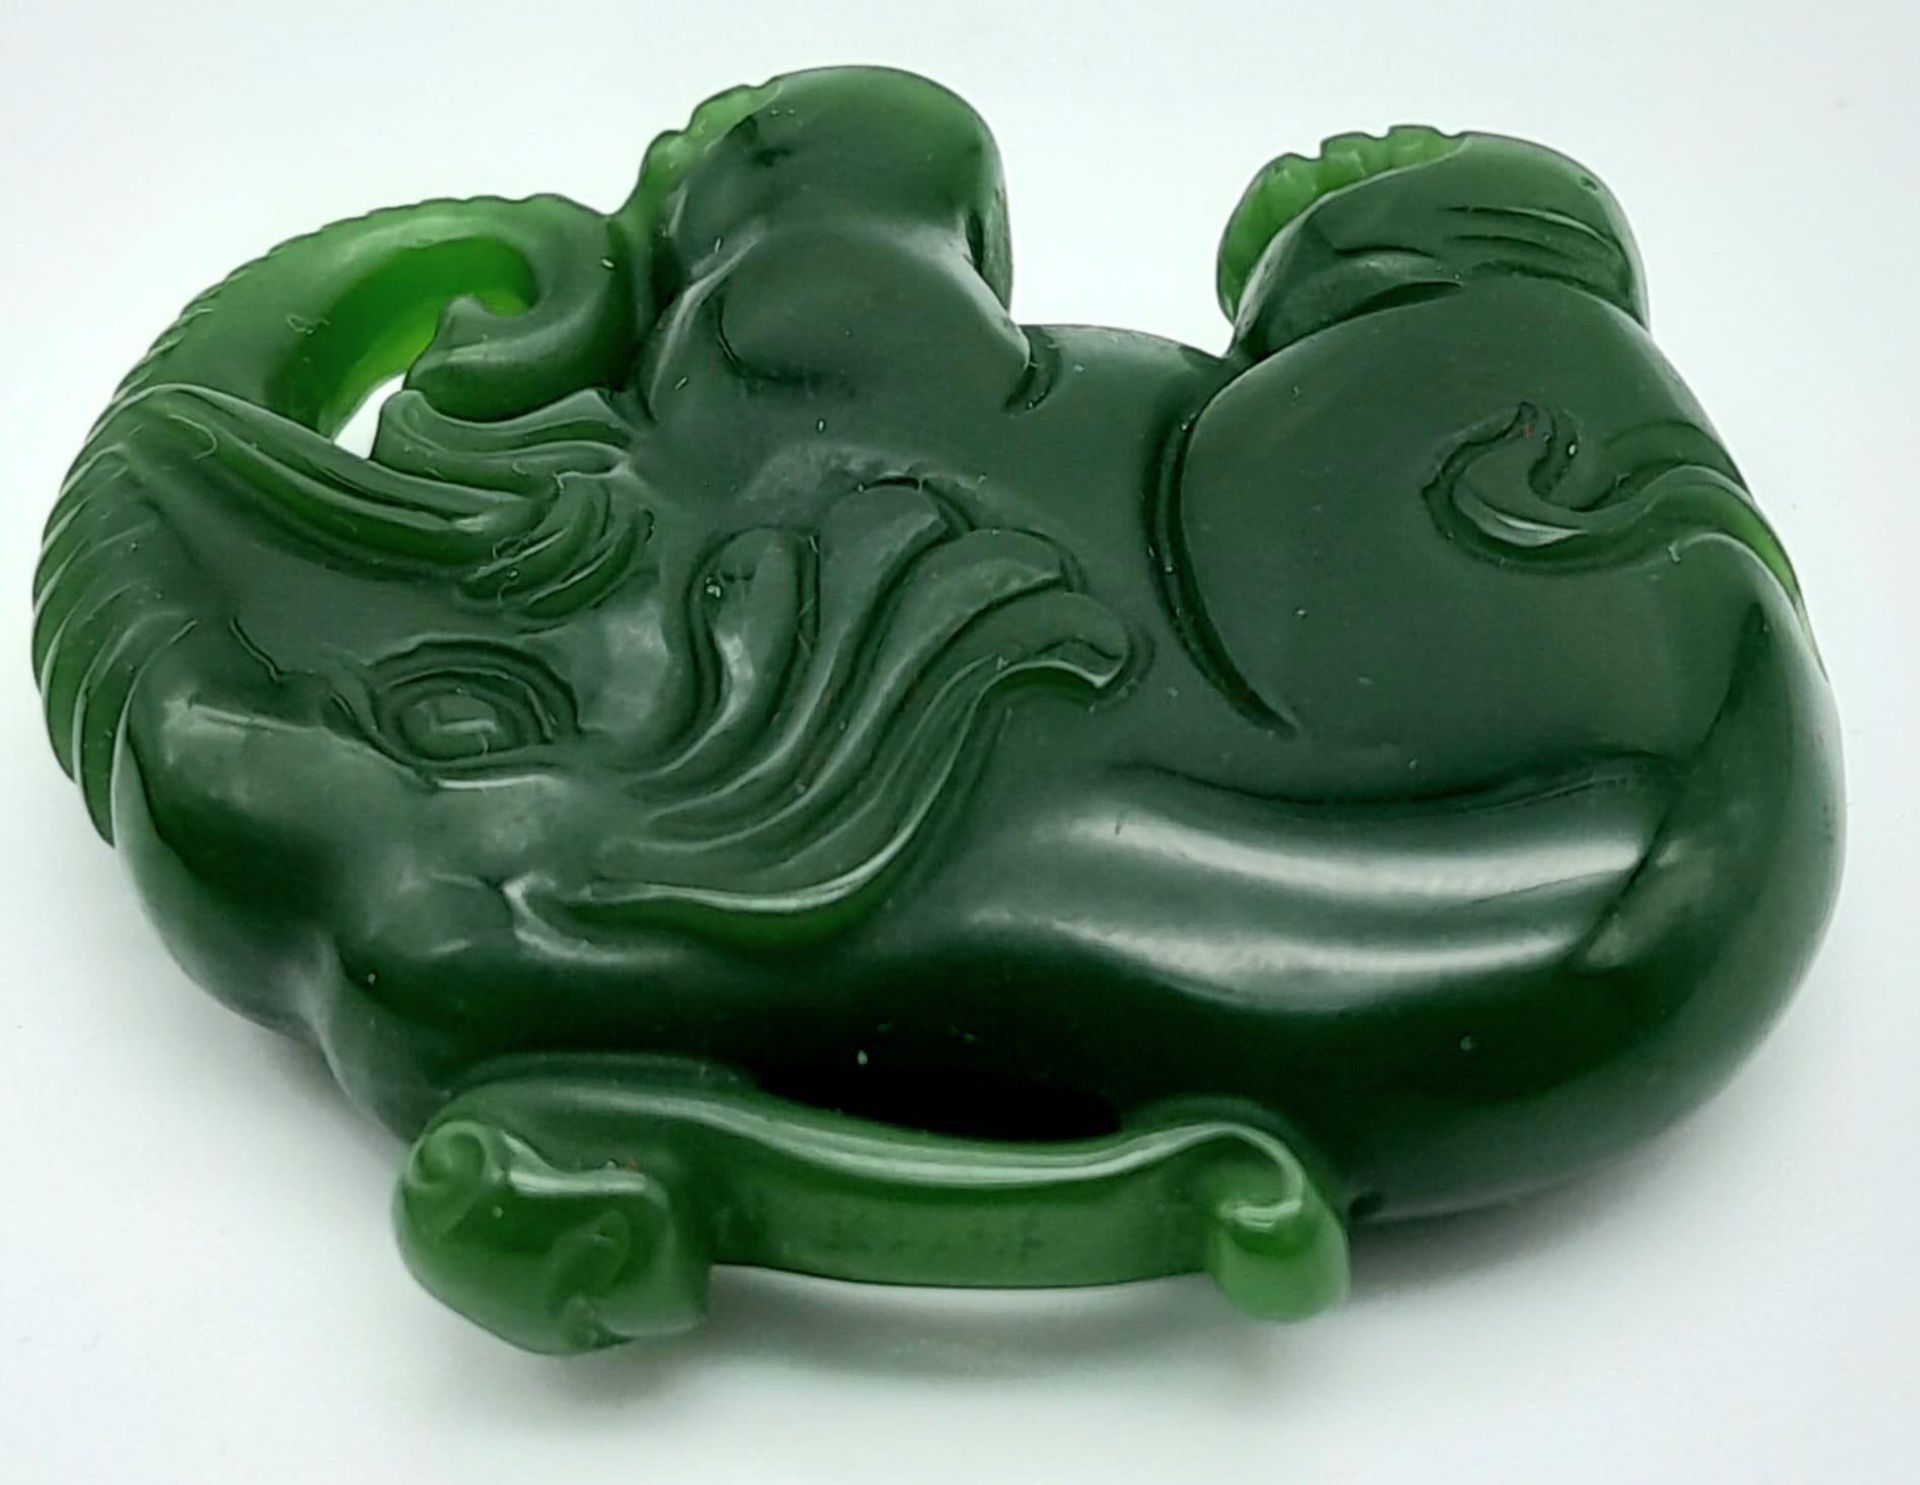 A Green Jade Chinese Hand-Carved Elephant Pendant. 5cm x 4cm. - Image 2 of 4